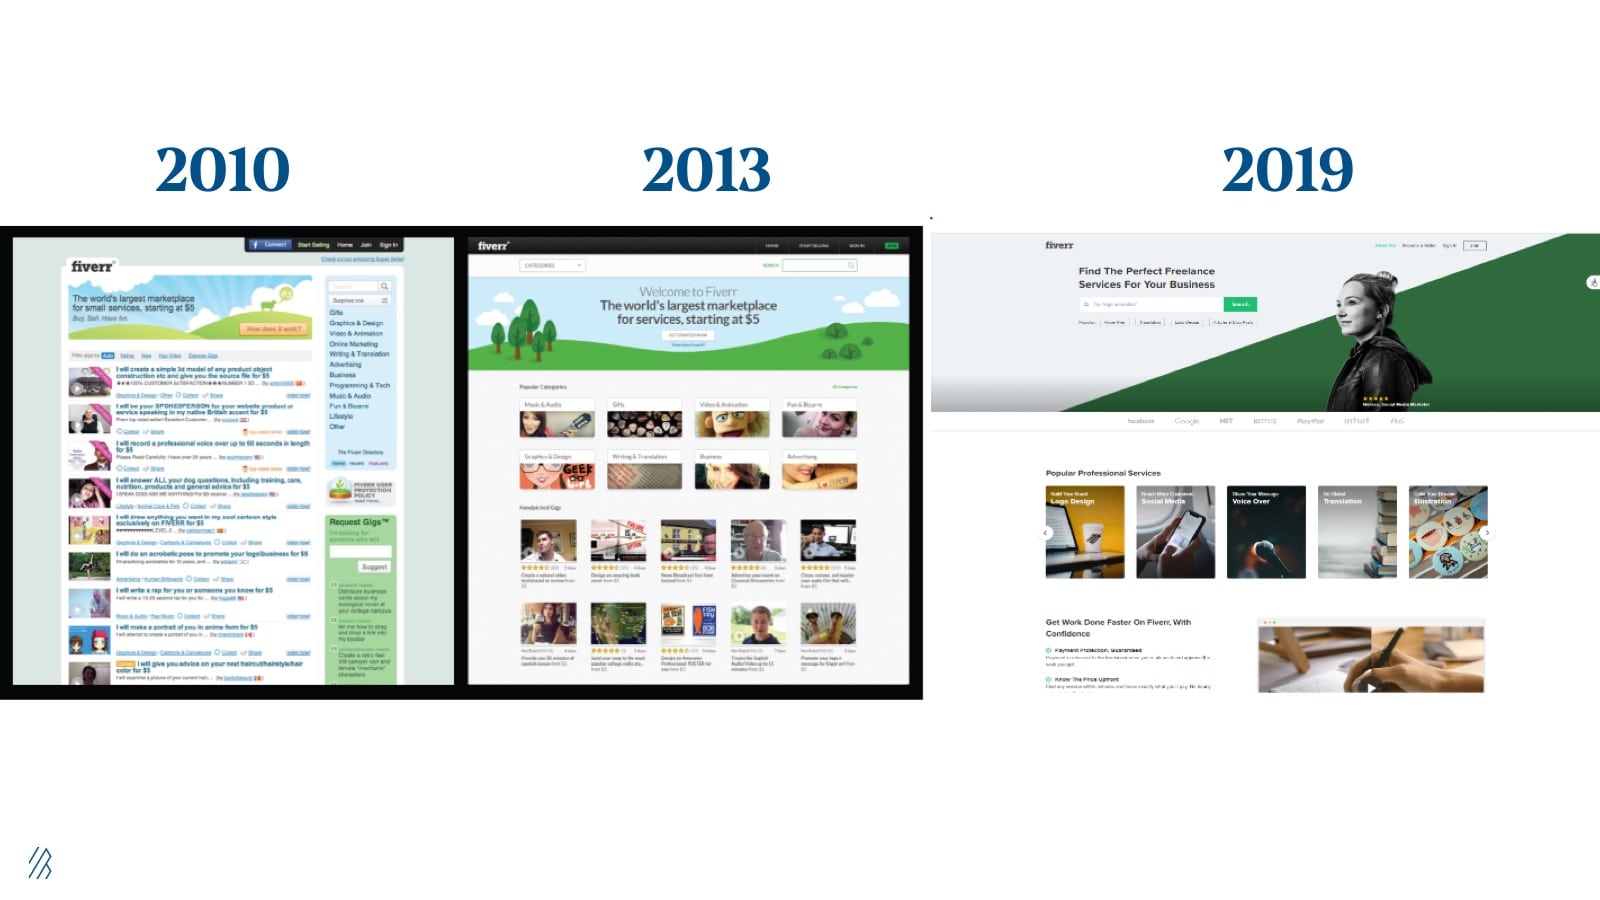 Image of Fiverr's homepages from 2010 to 2019 